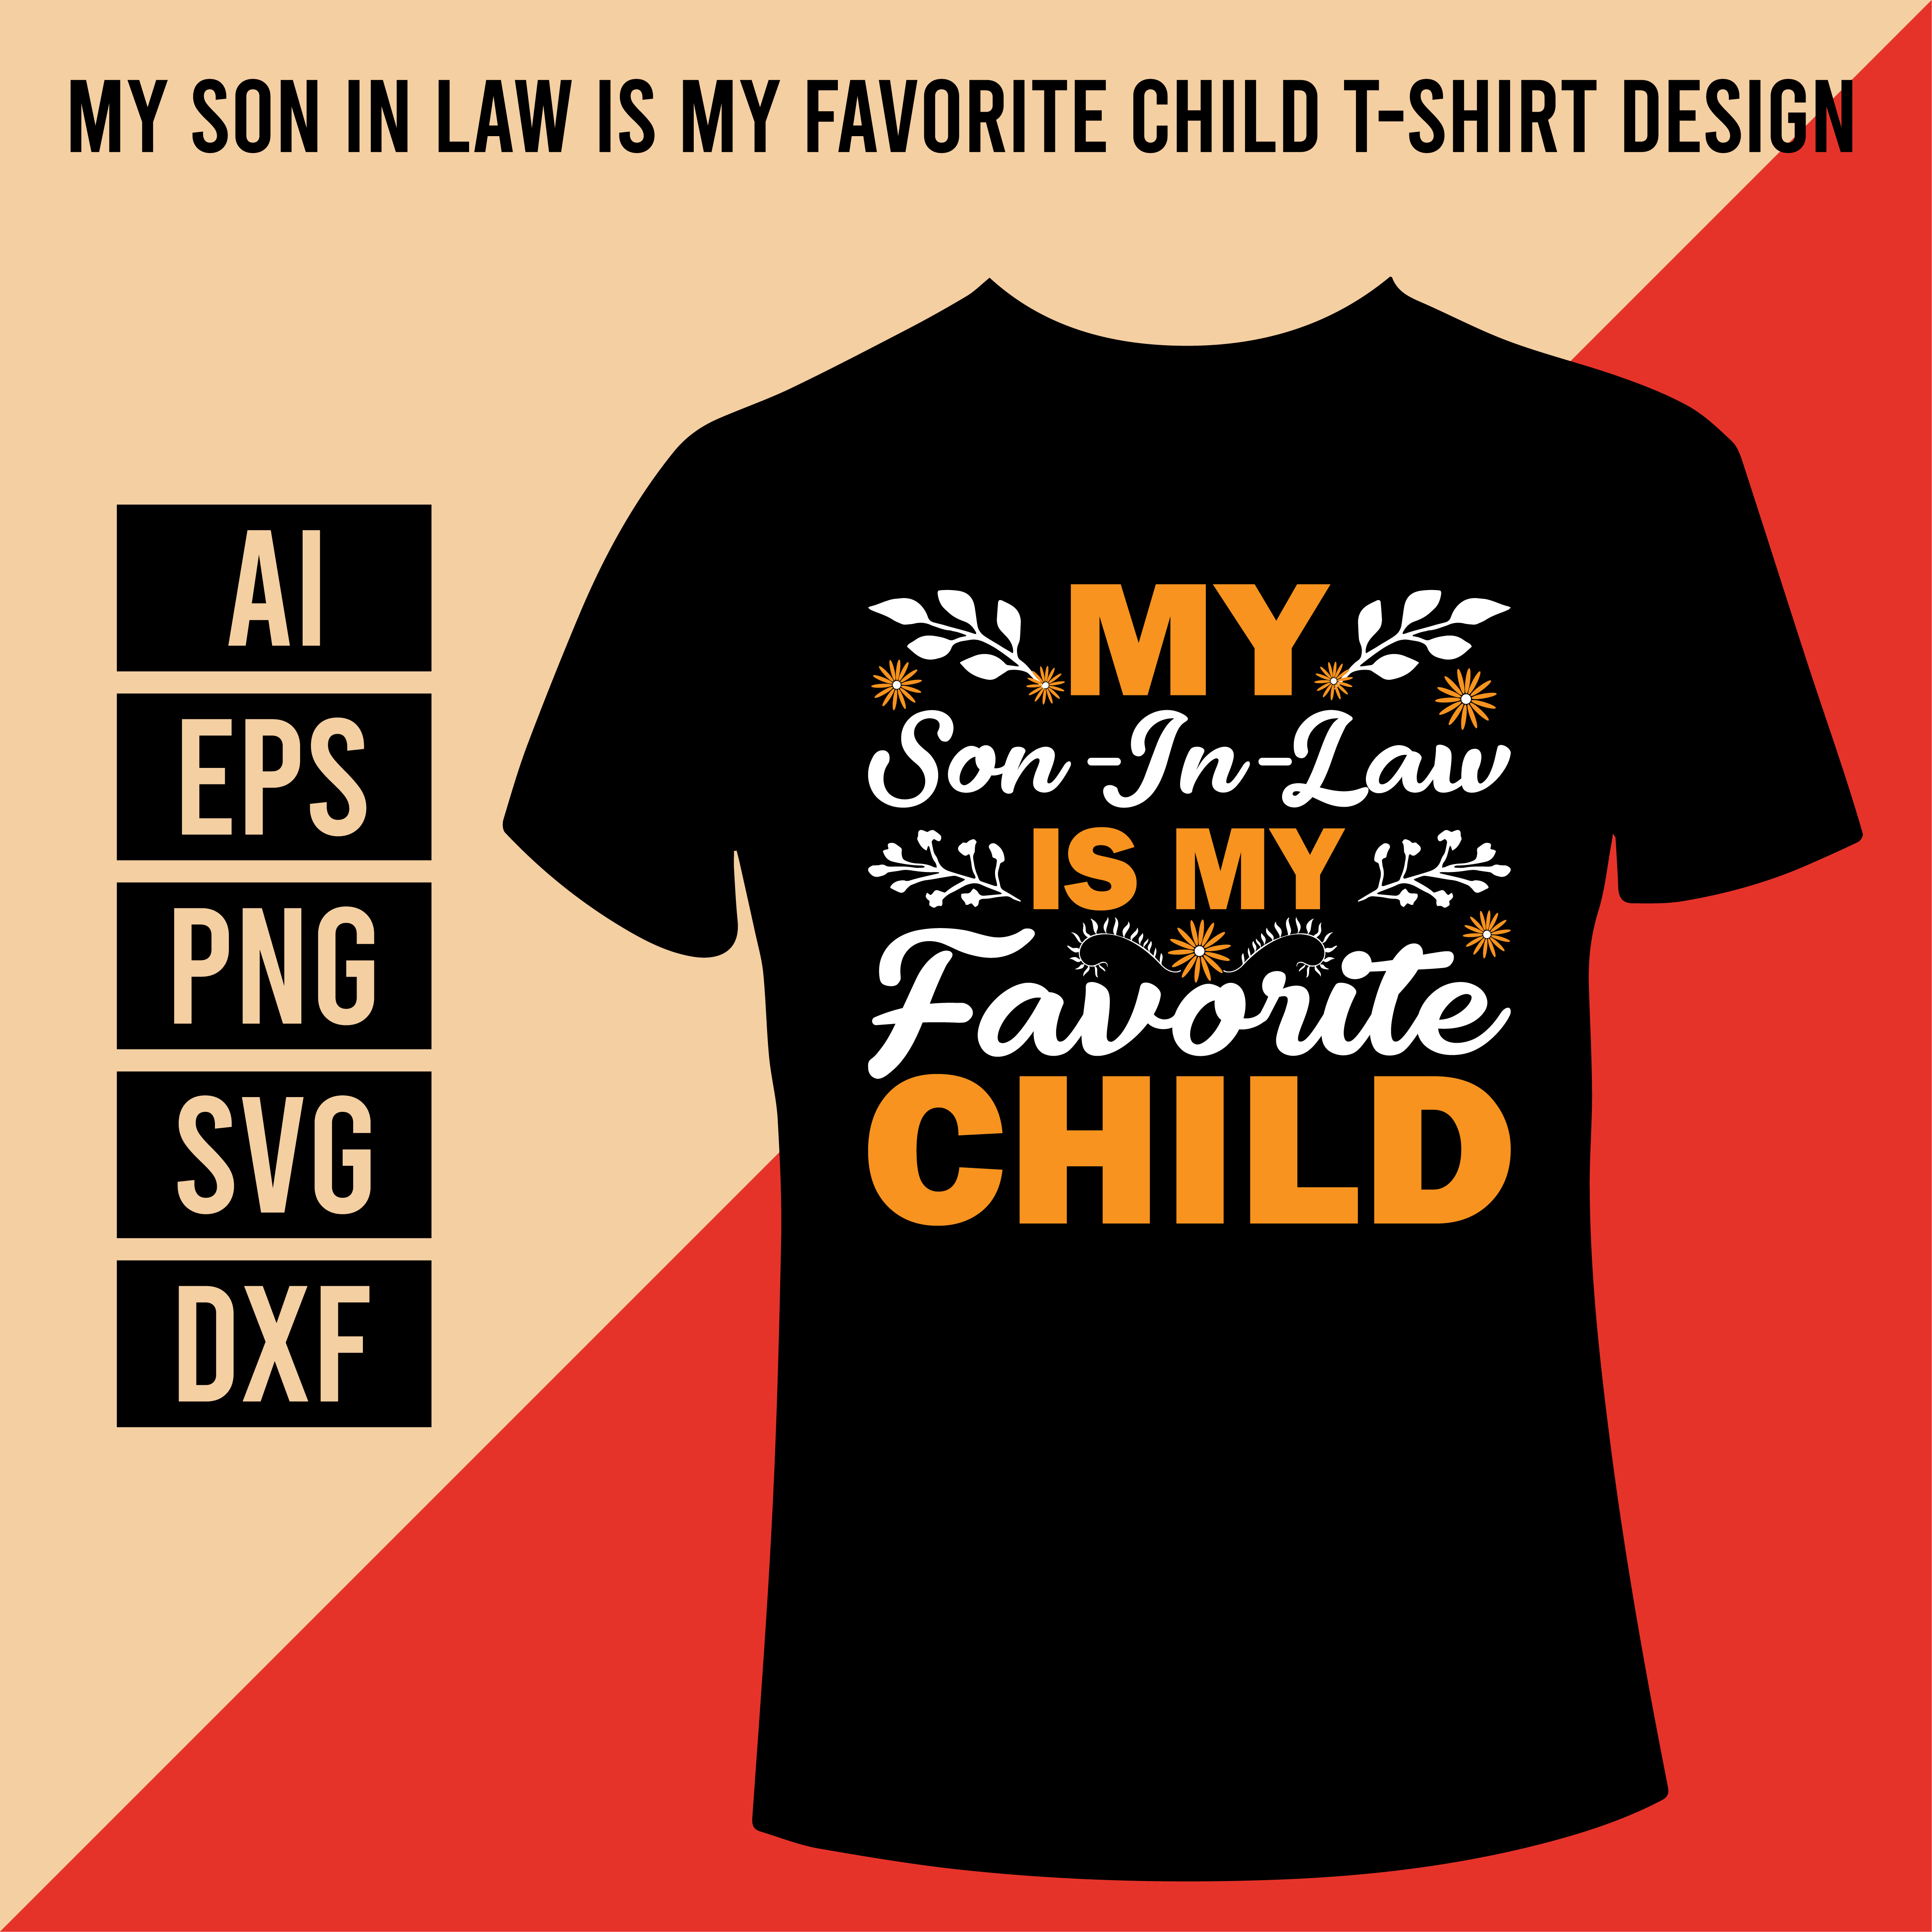 My Son In Law Is My Favorite Child T-Shirt Design cover image.